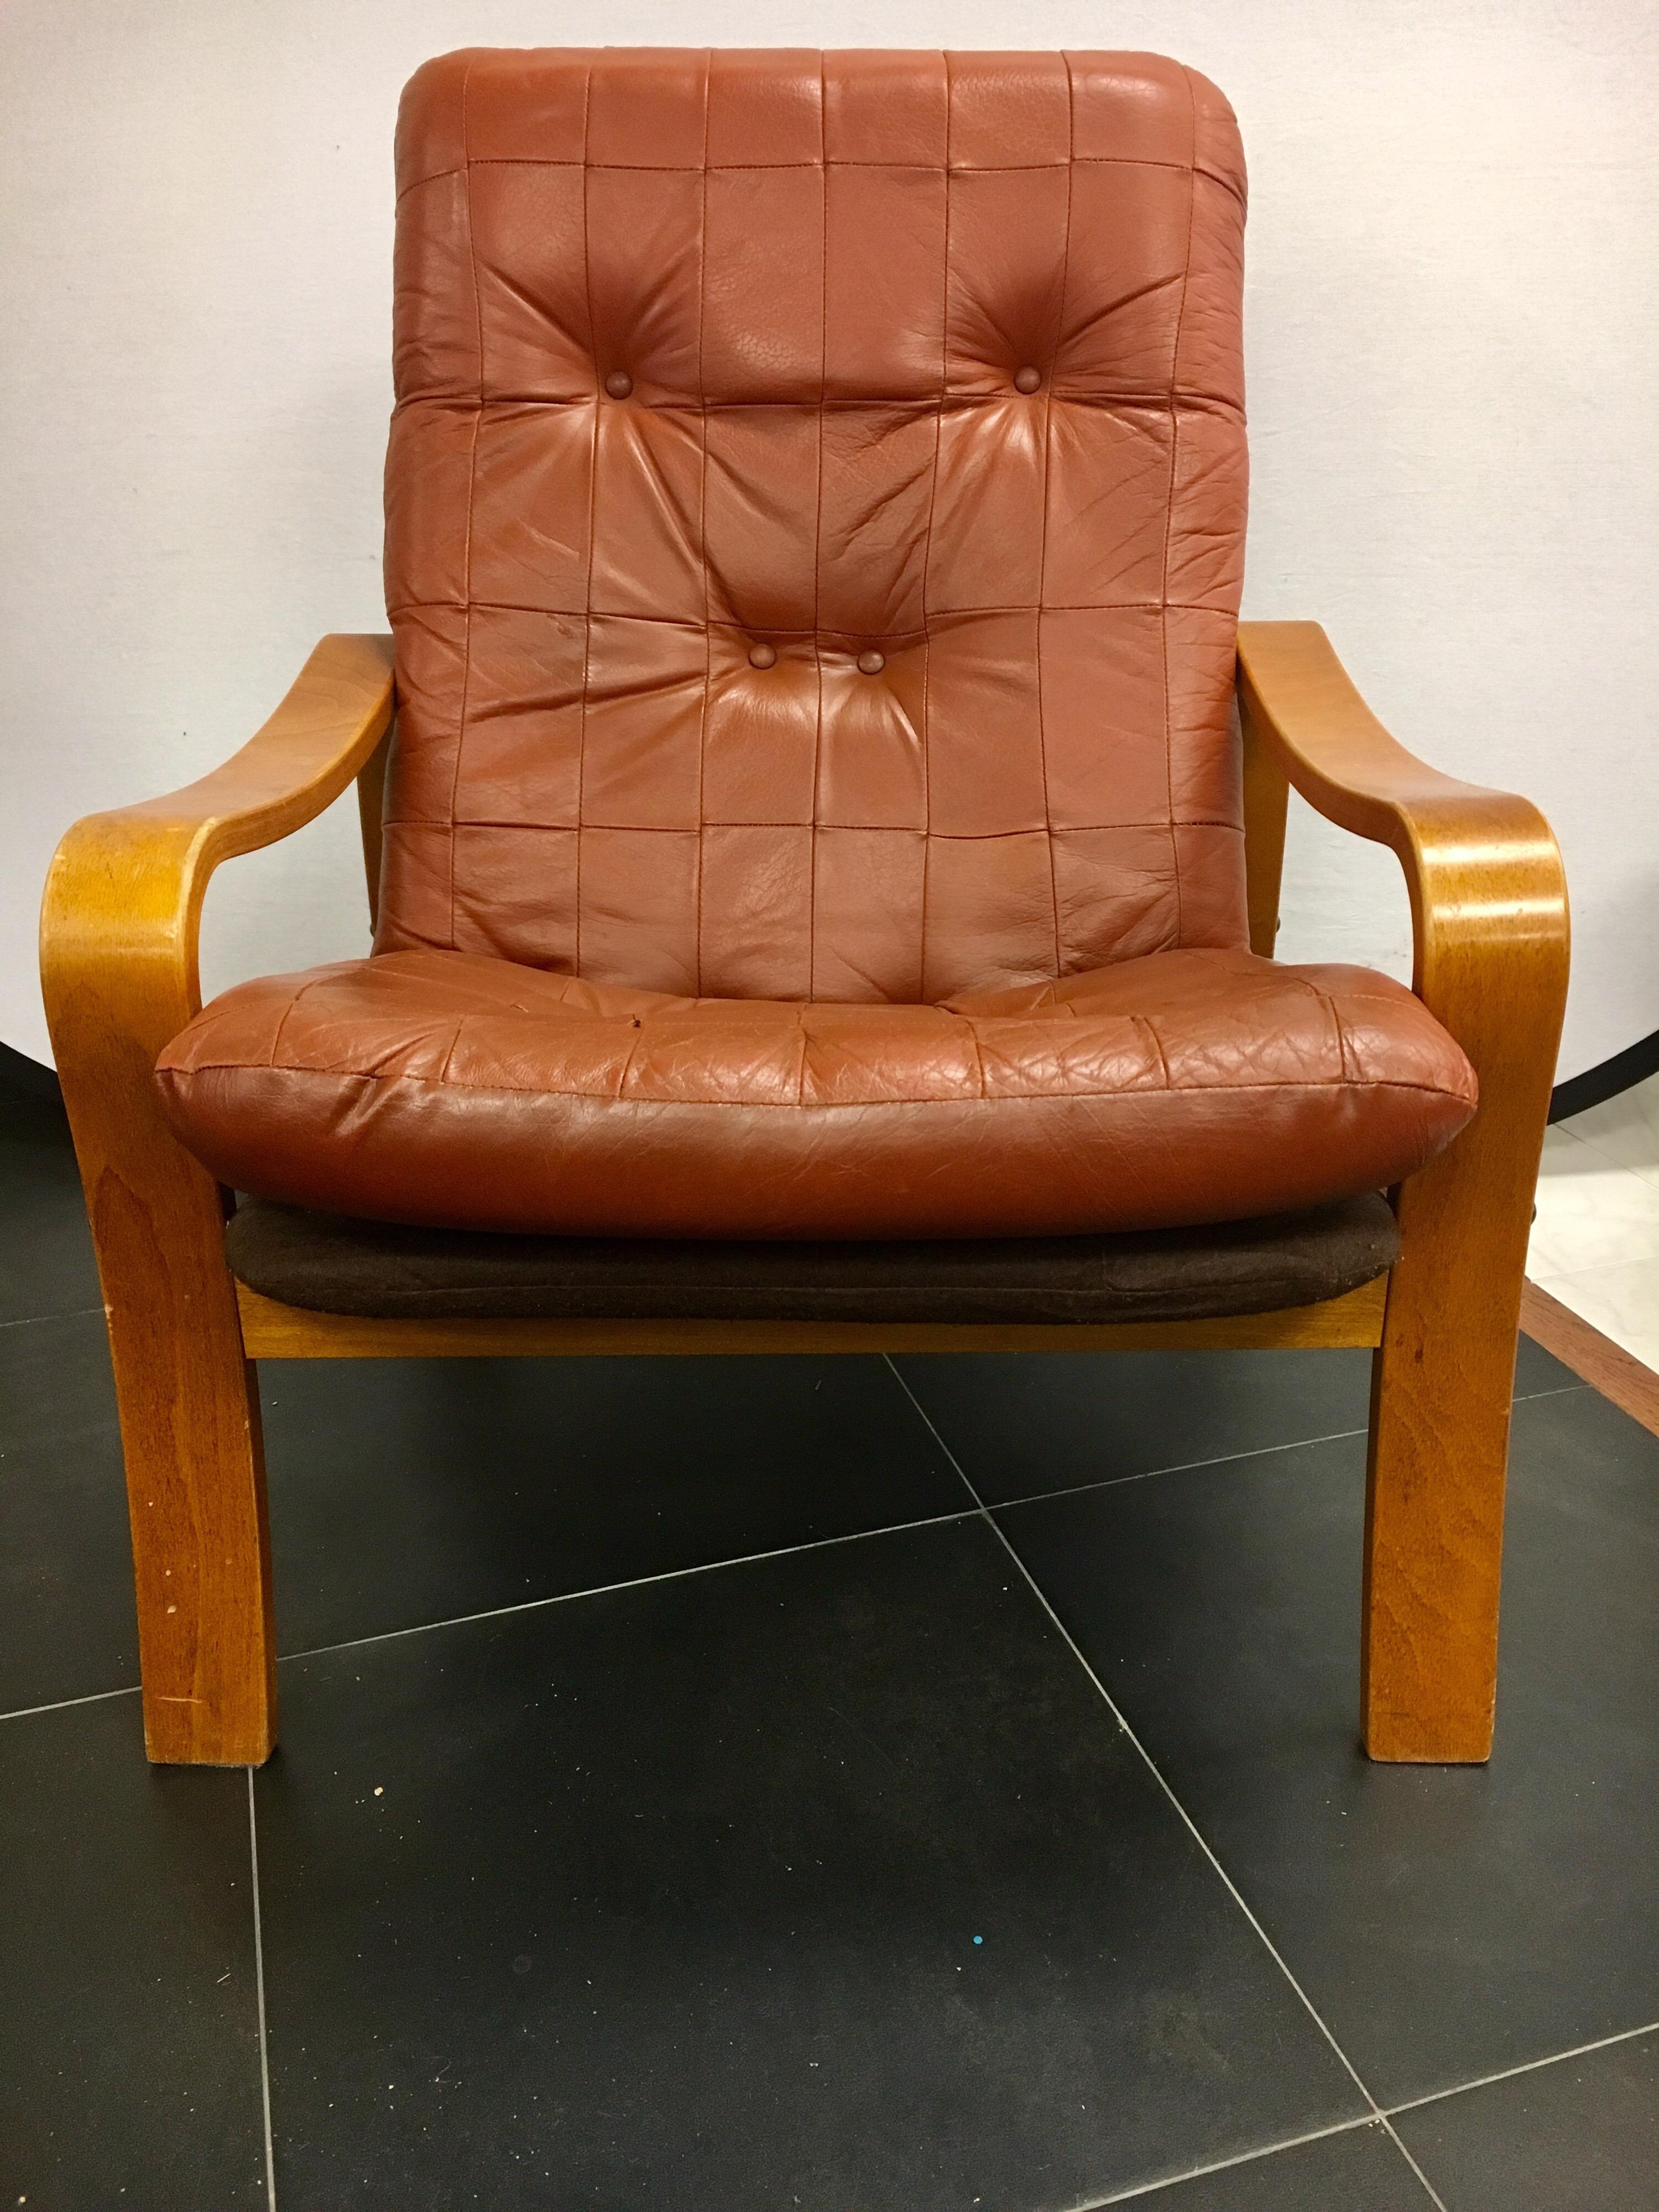 Danish modern teak lounge chair with quilted and tufted leather back and seat cushion. Back and seat cushion is one piece, not attached.